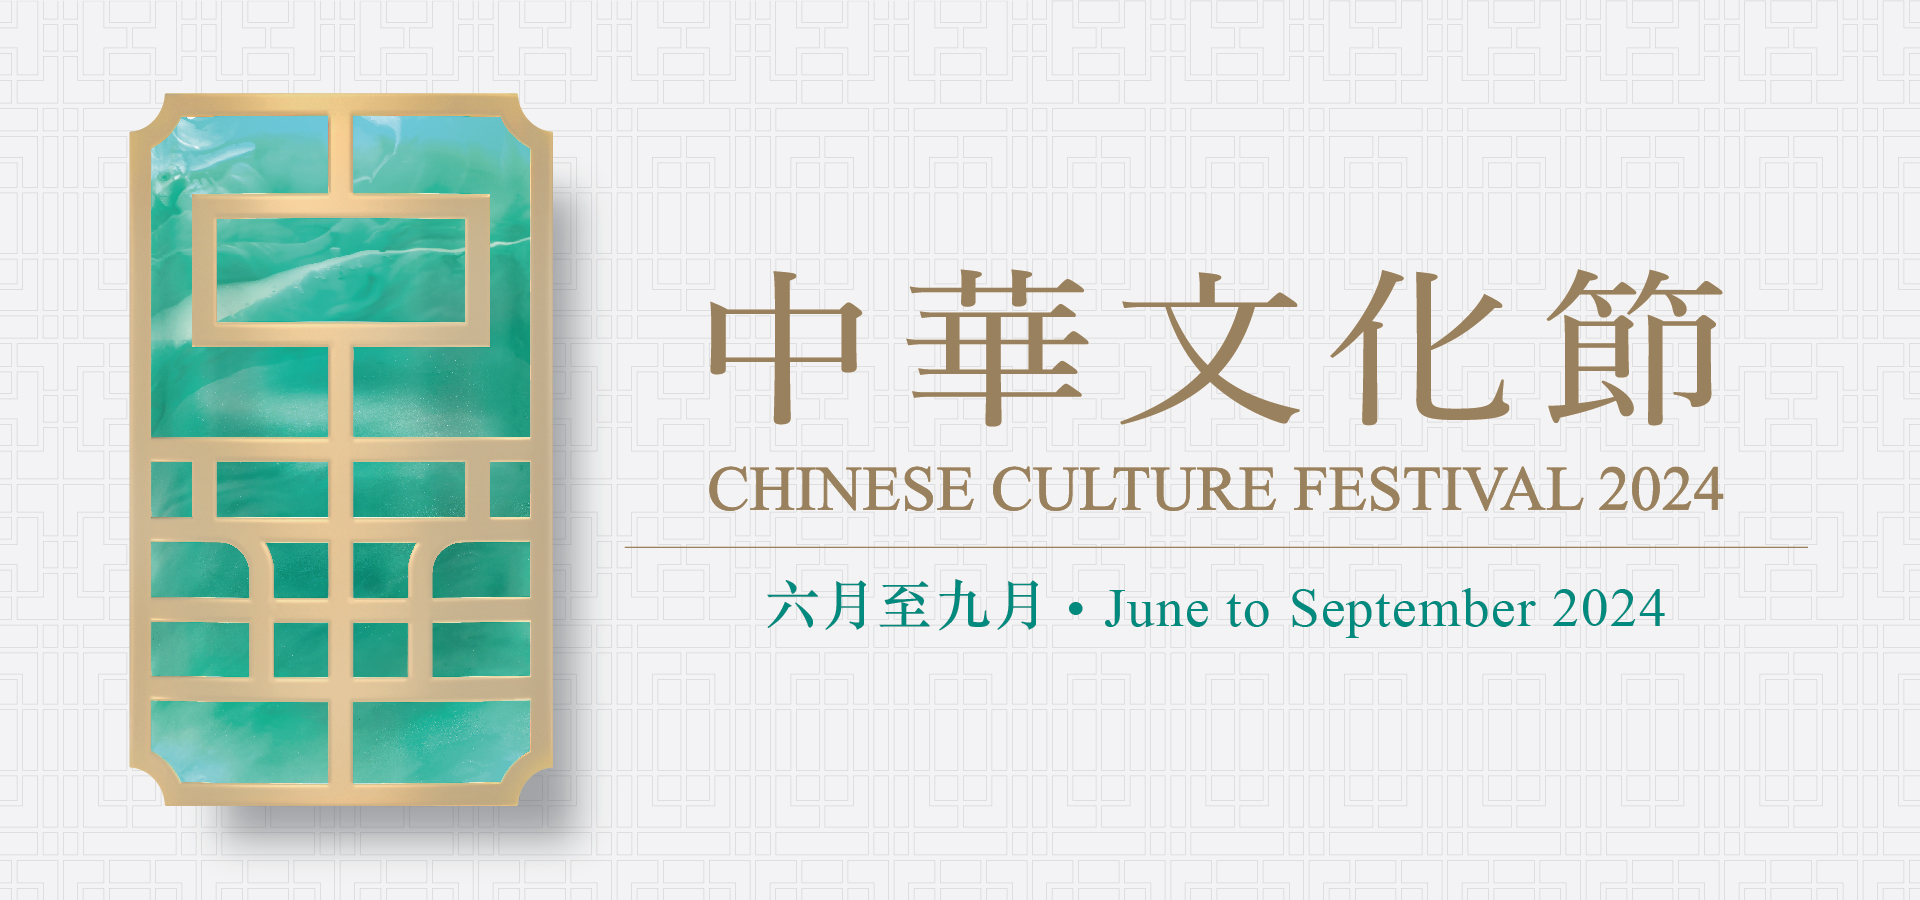 Chinese Culture Festival 2024